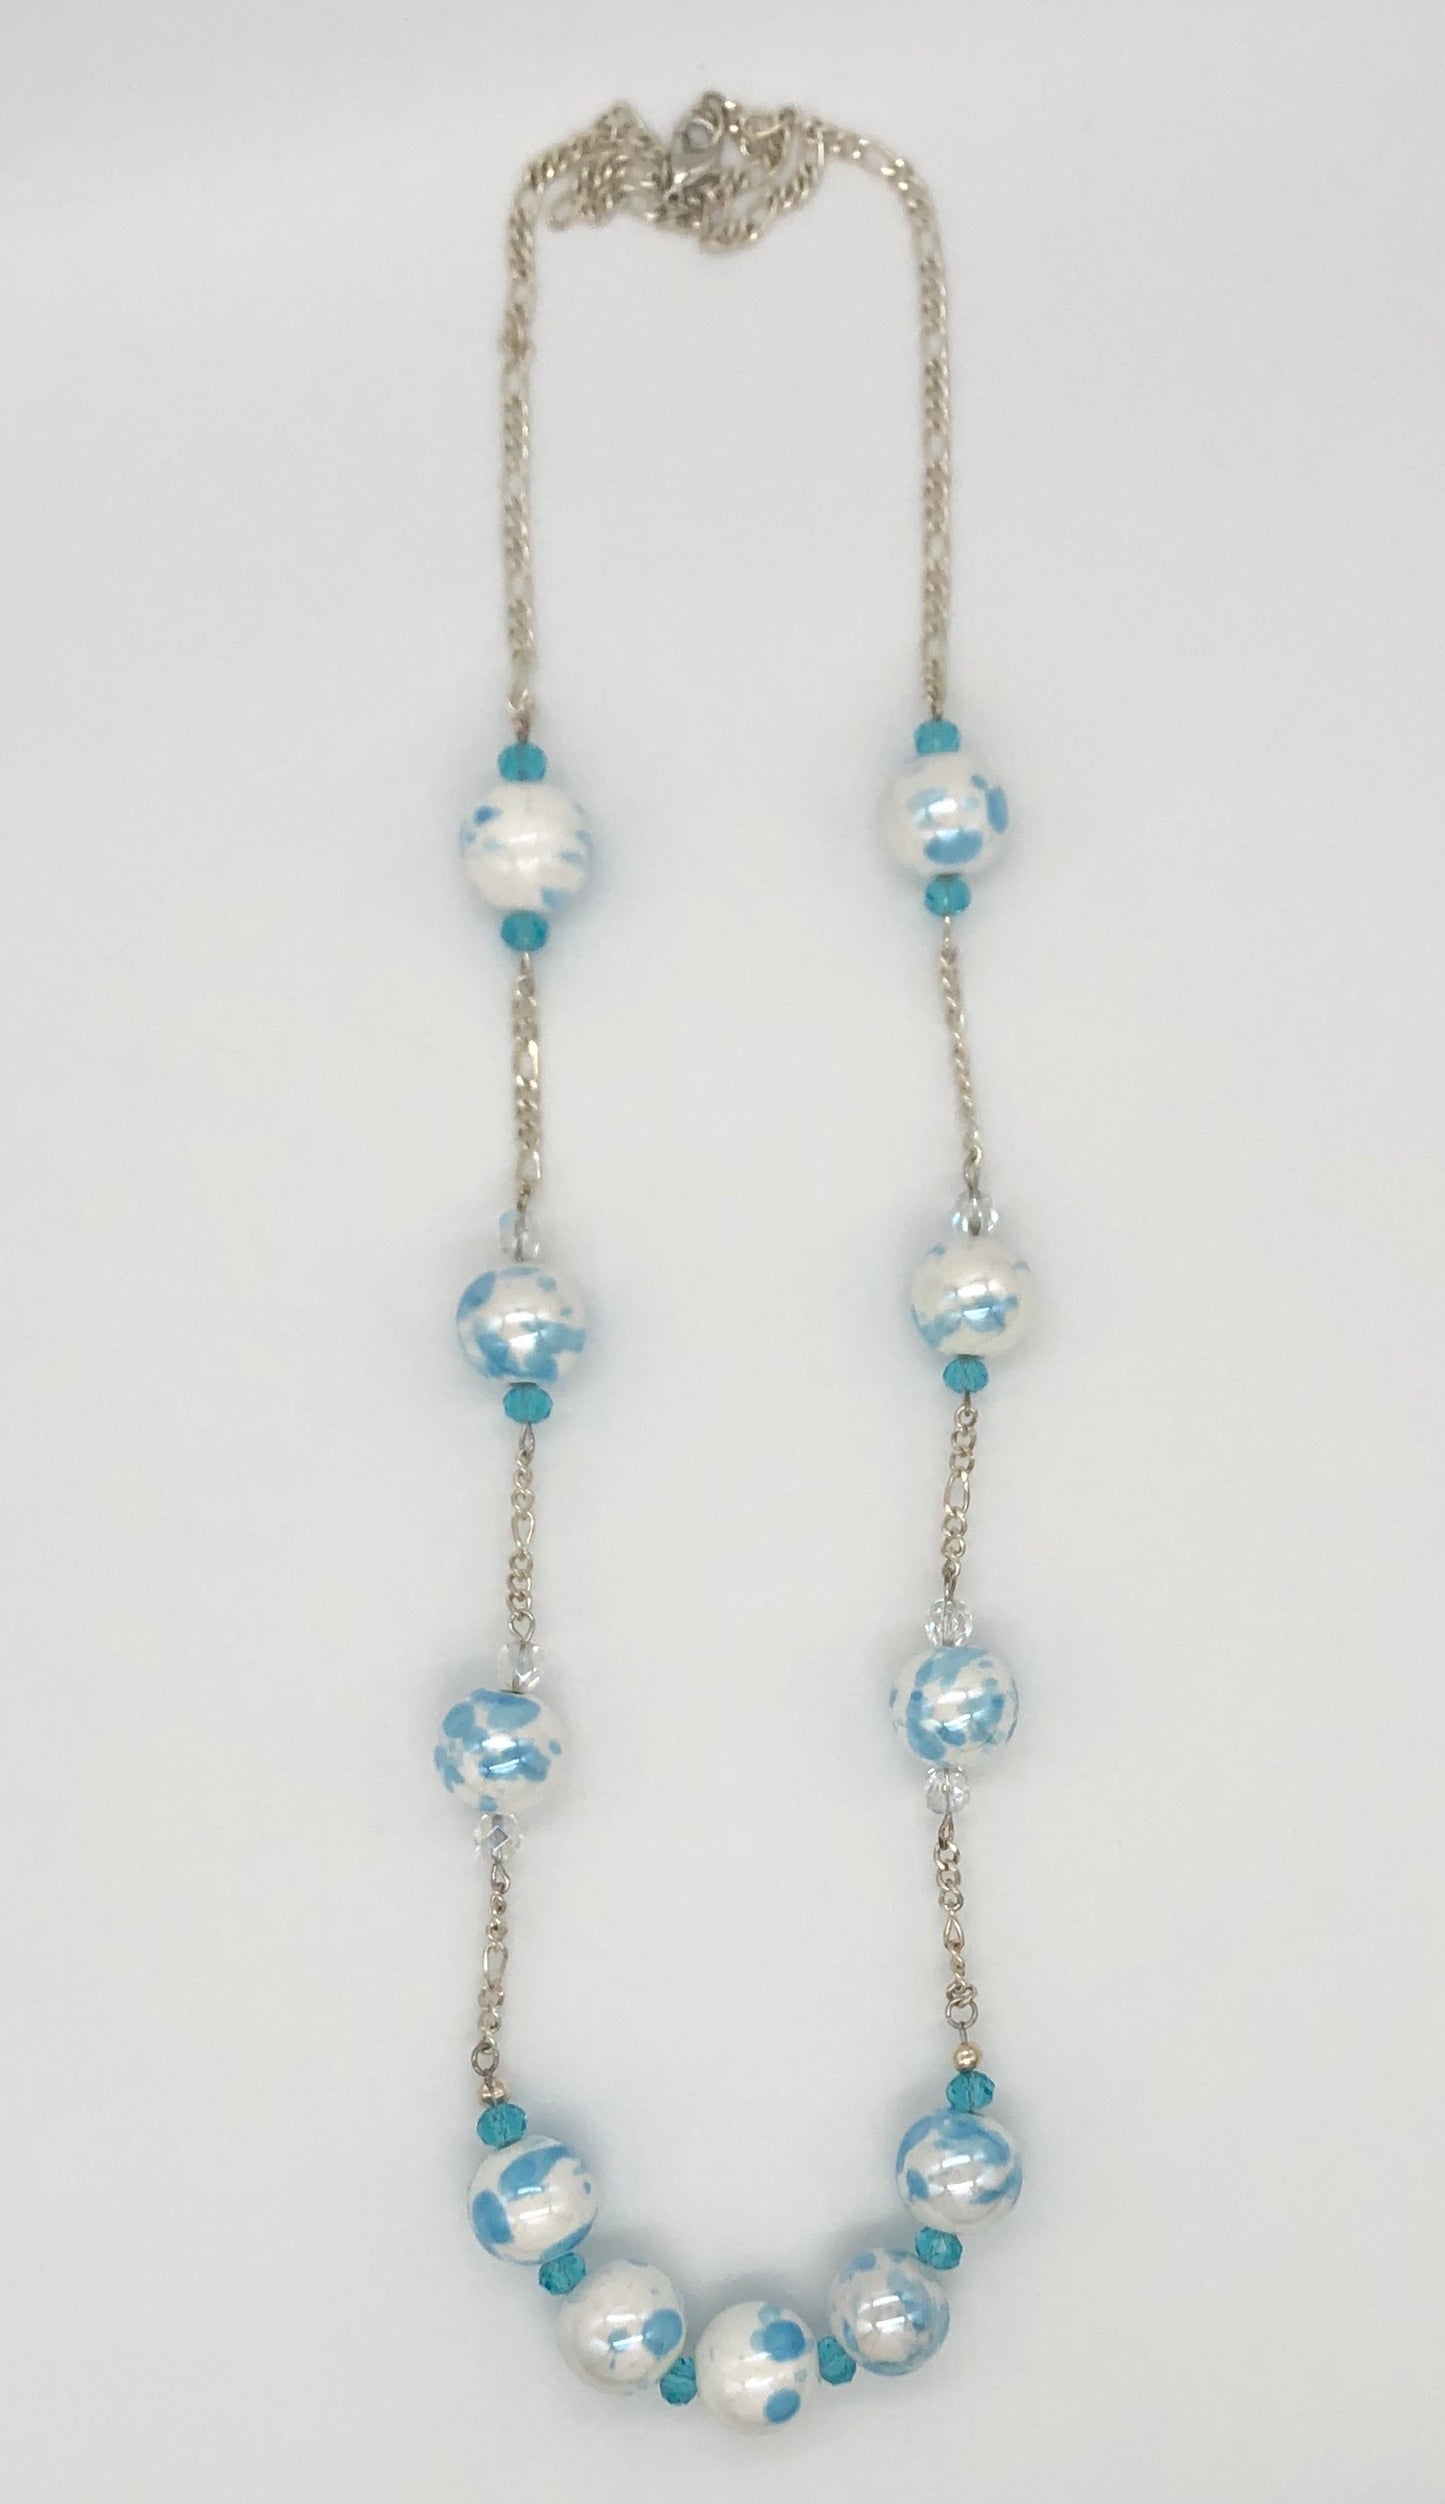 Aqua blue and white marble beaded chain necklace